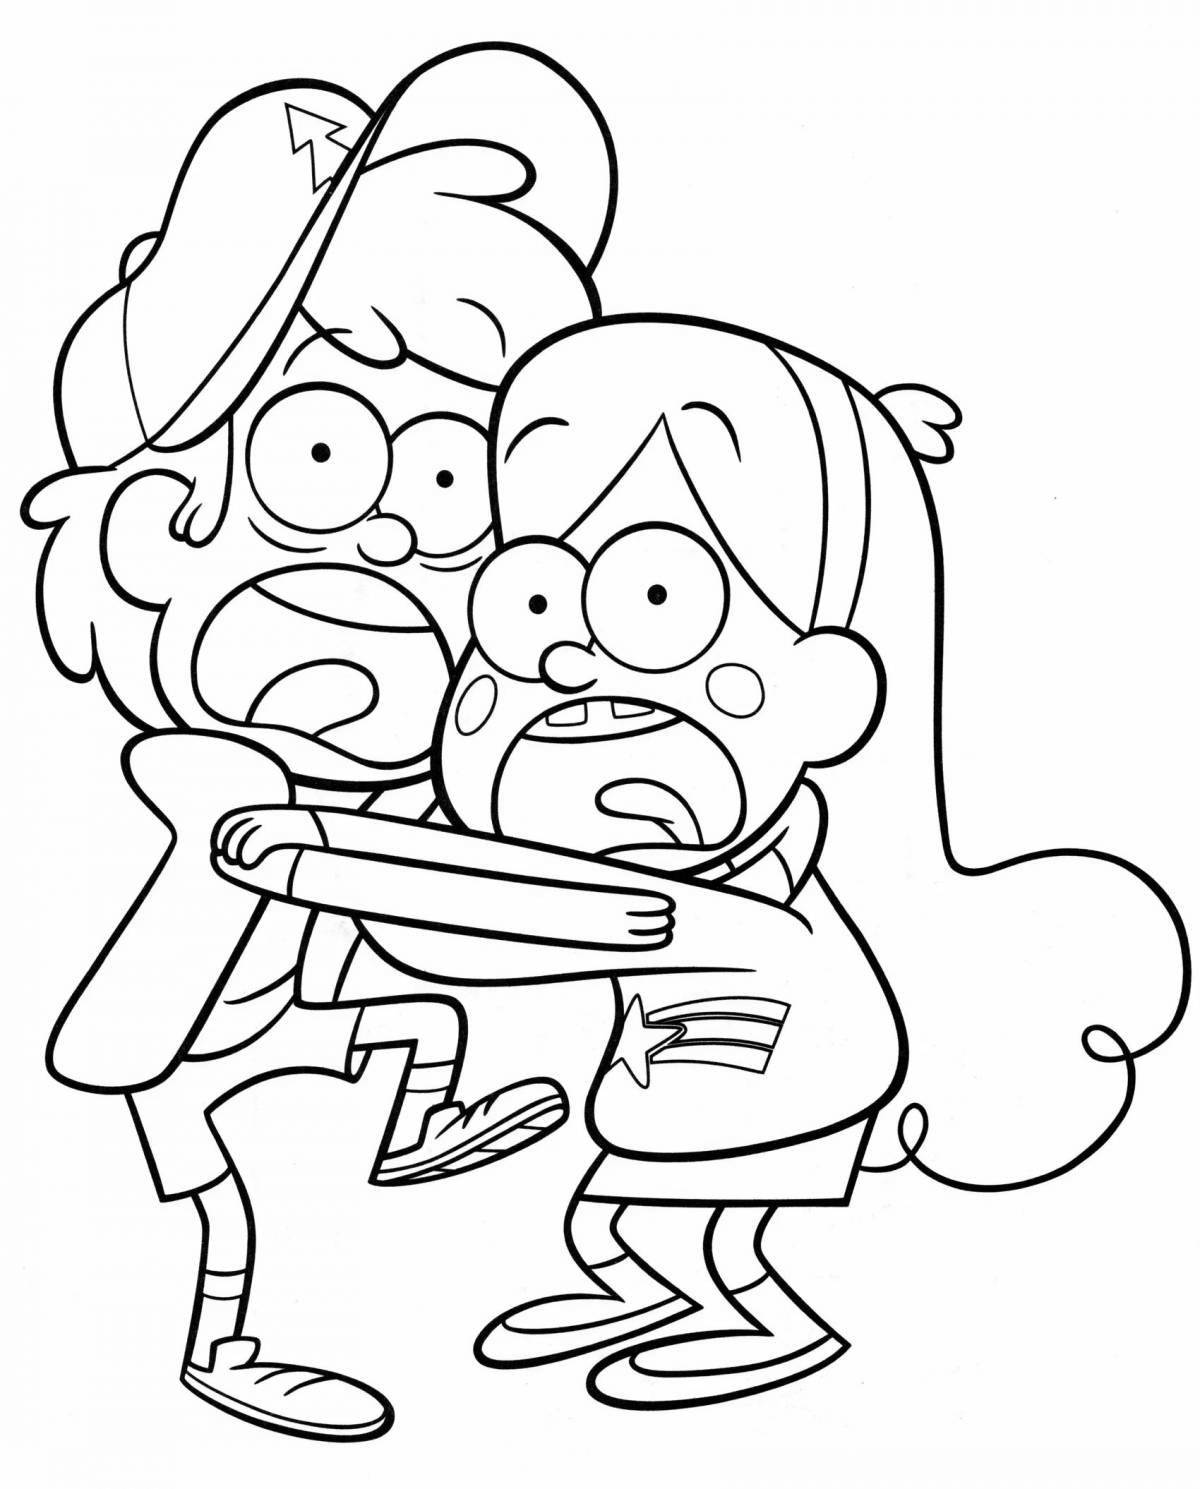 Mabel and chubby fun coloring book